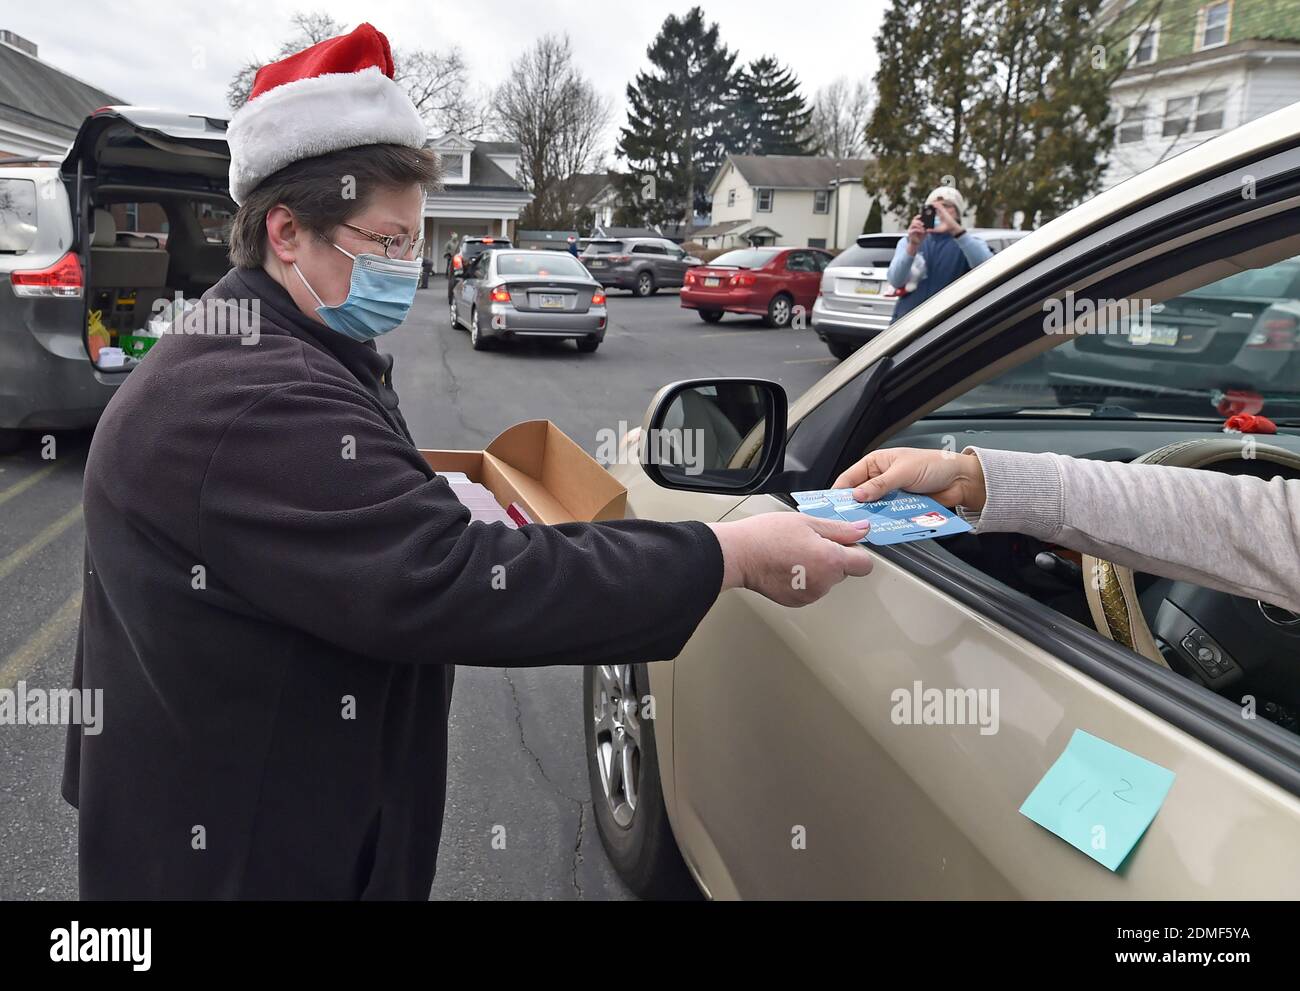 Kingston, United States. 16th Dec, 2020. A volunteer hands a food pantry guest a gift card for groceries to go along with the food they supply.Since the start of Covid the Al Beech food pantry has been very busy, today they served there one millionth guest. For Christmas volunteers wore Santa hats and handed out gift cards, candy and balloons along with the regular food goods. Credit: SOPA Images Limited/Alamy Live News Stock Photo